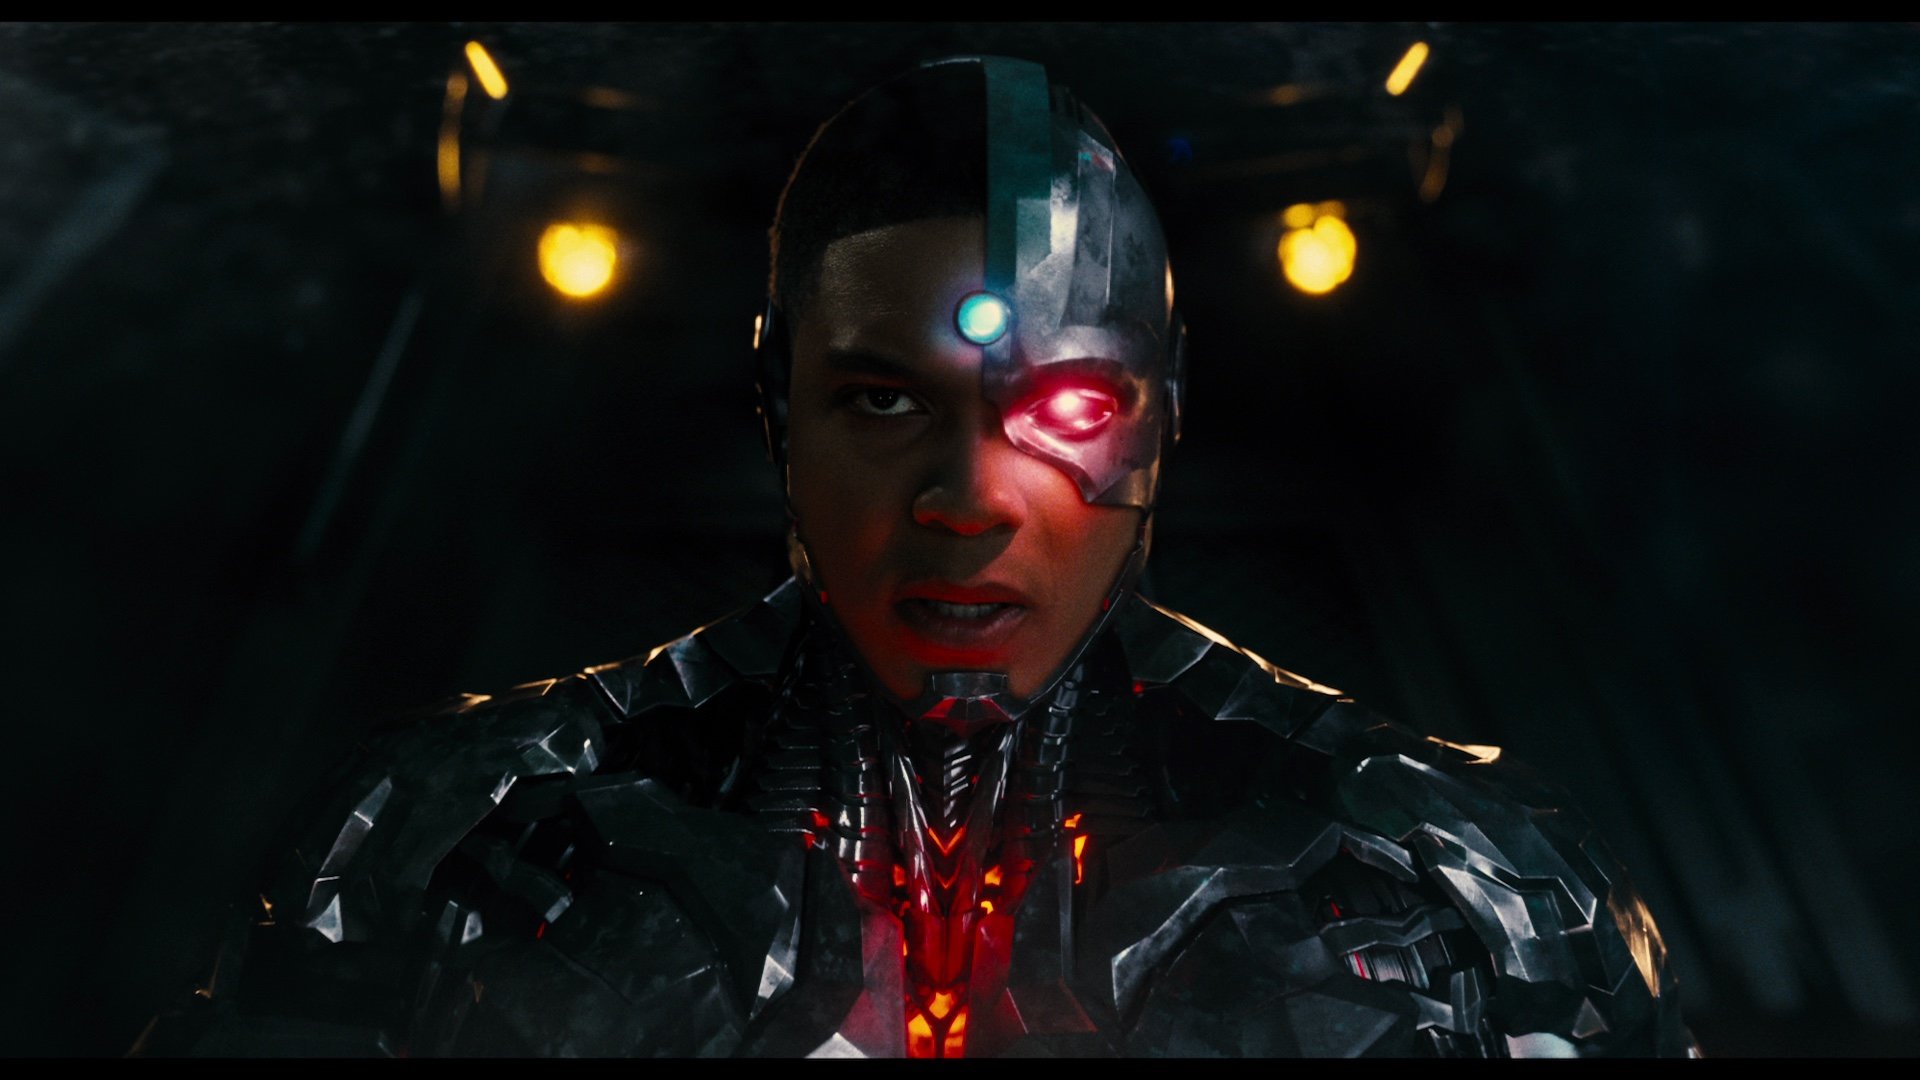 Cyborg Dc Comics Justice League 2017 Ray Fisher 1920x1080